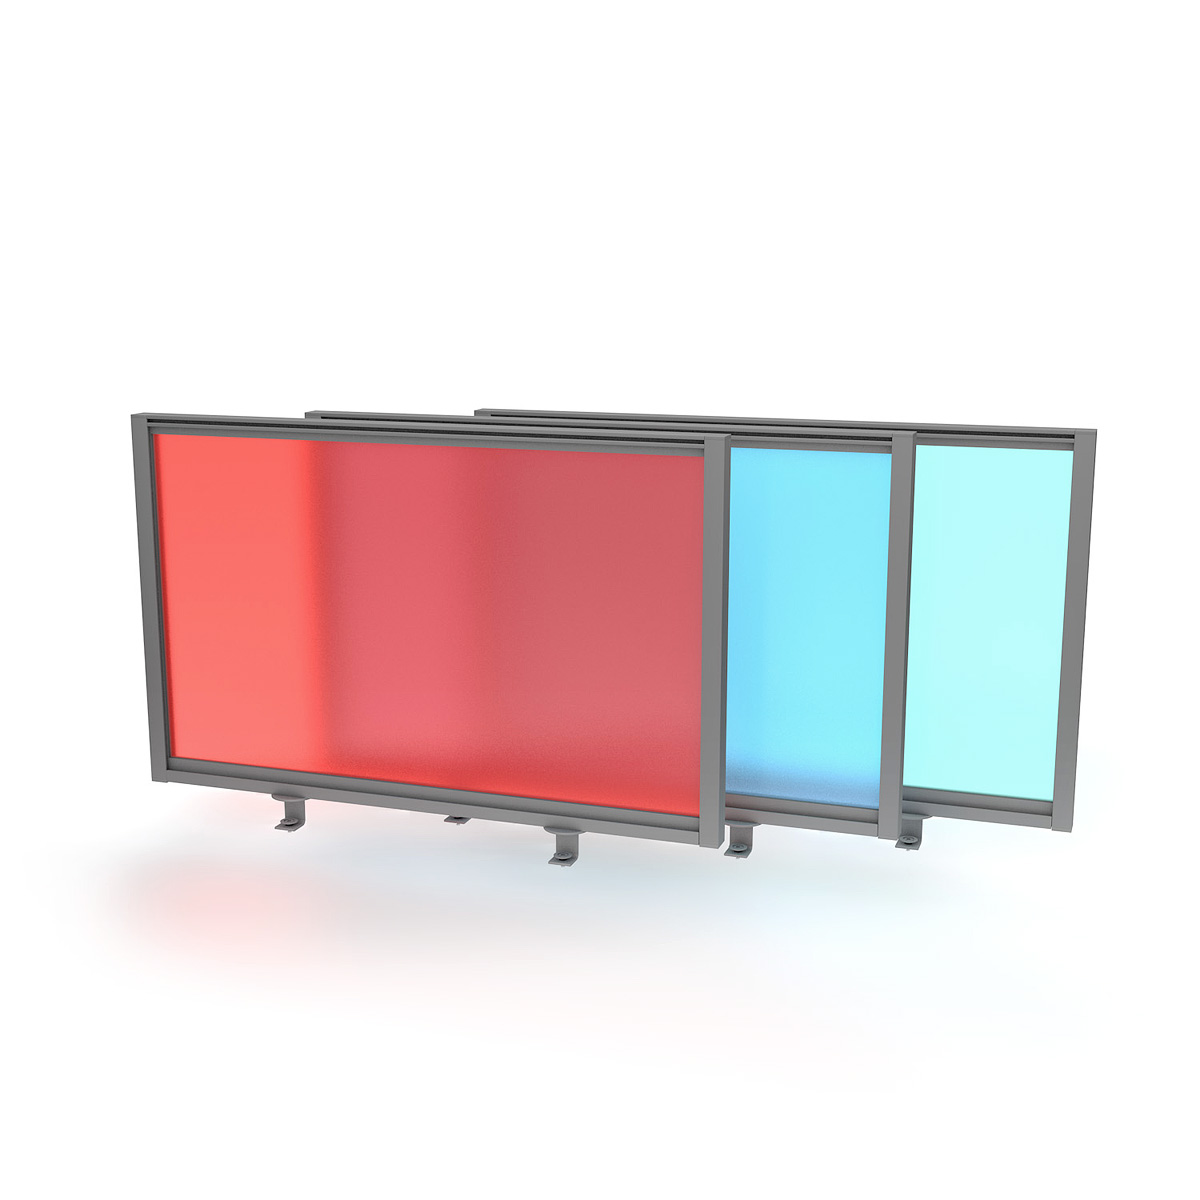 FRONTIER® Glazed Office Screen Desk Dividers With Coloured Acrylic Perspex®